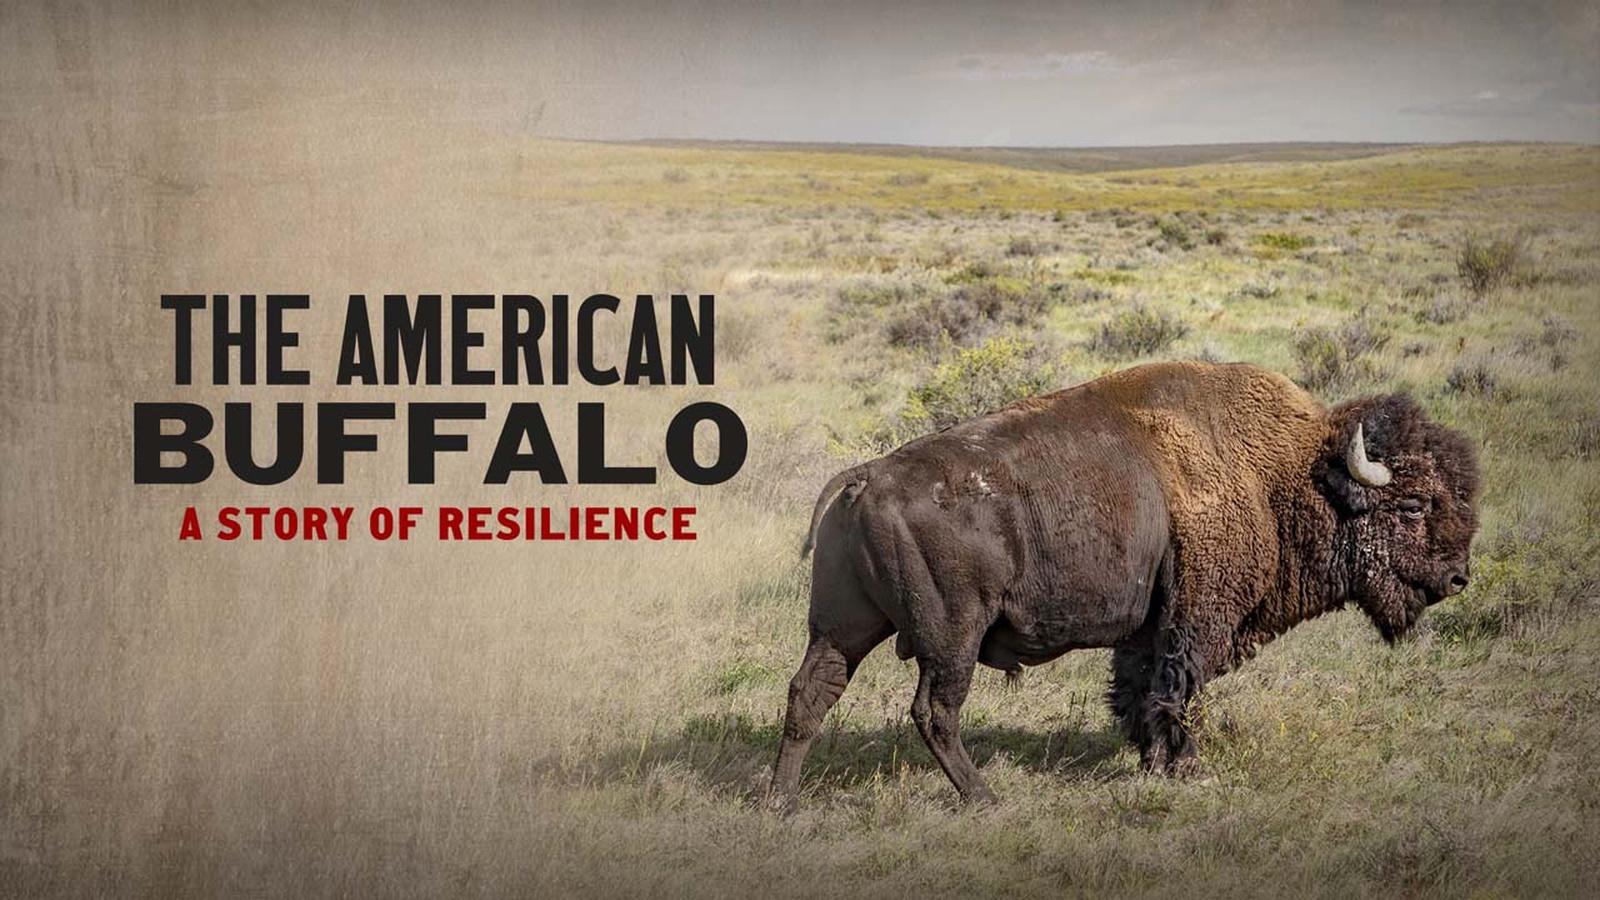 THE AMERICAN BUFFALO <br/>A Story of Resilience